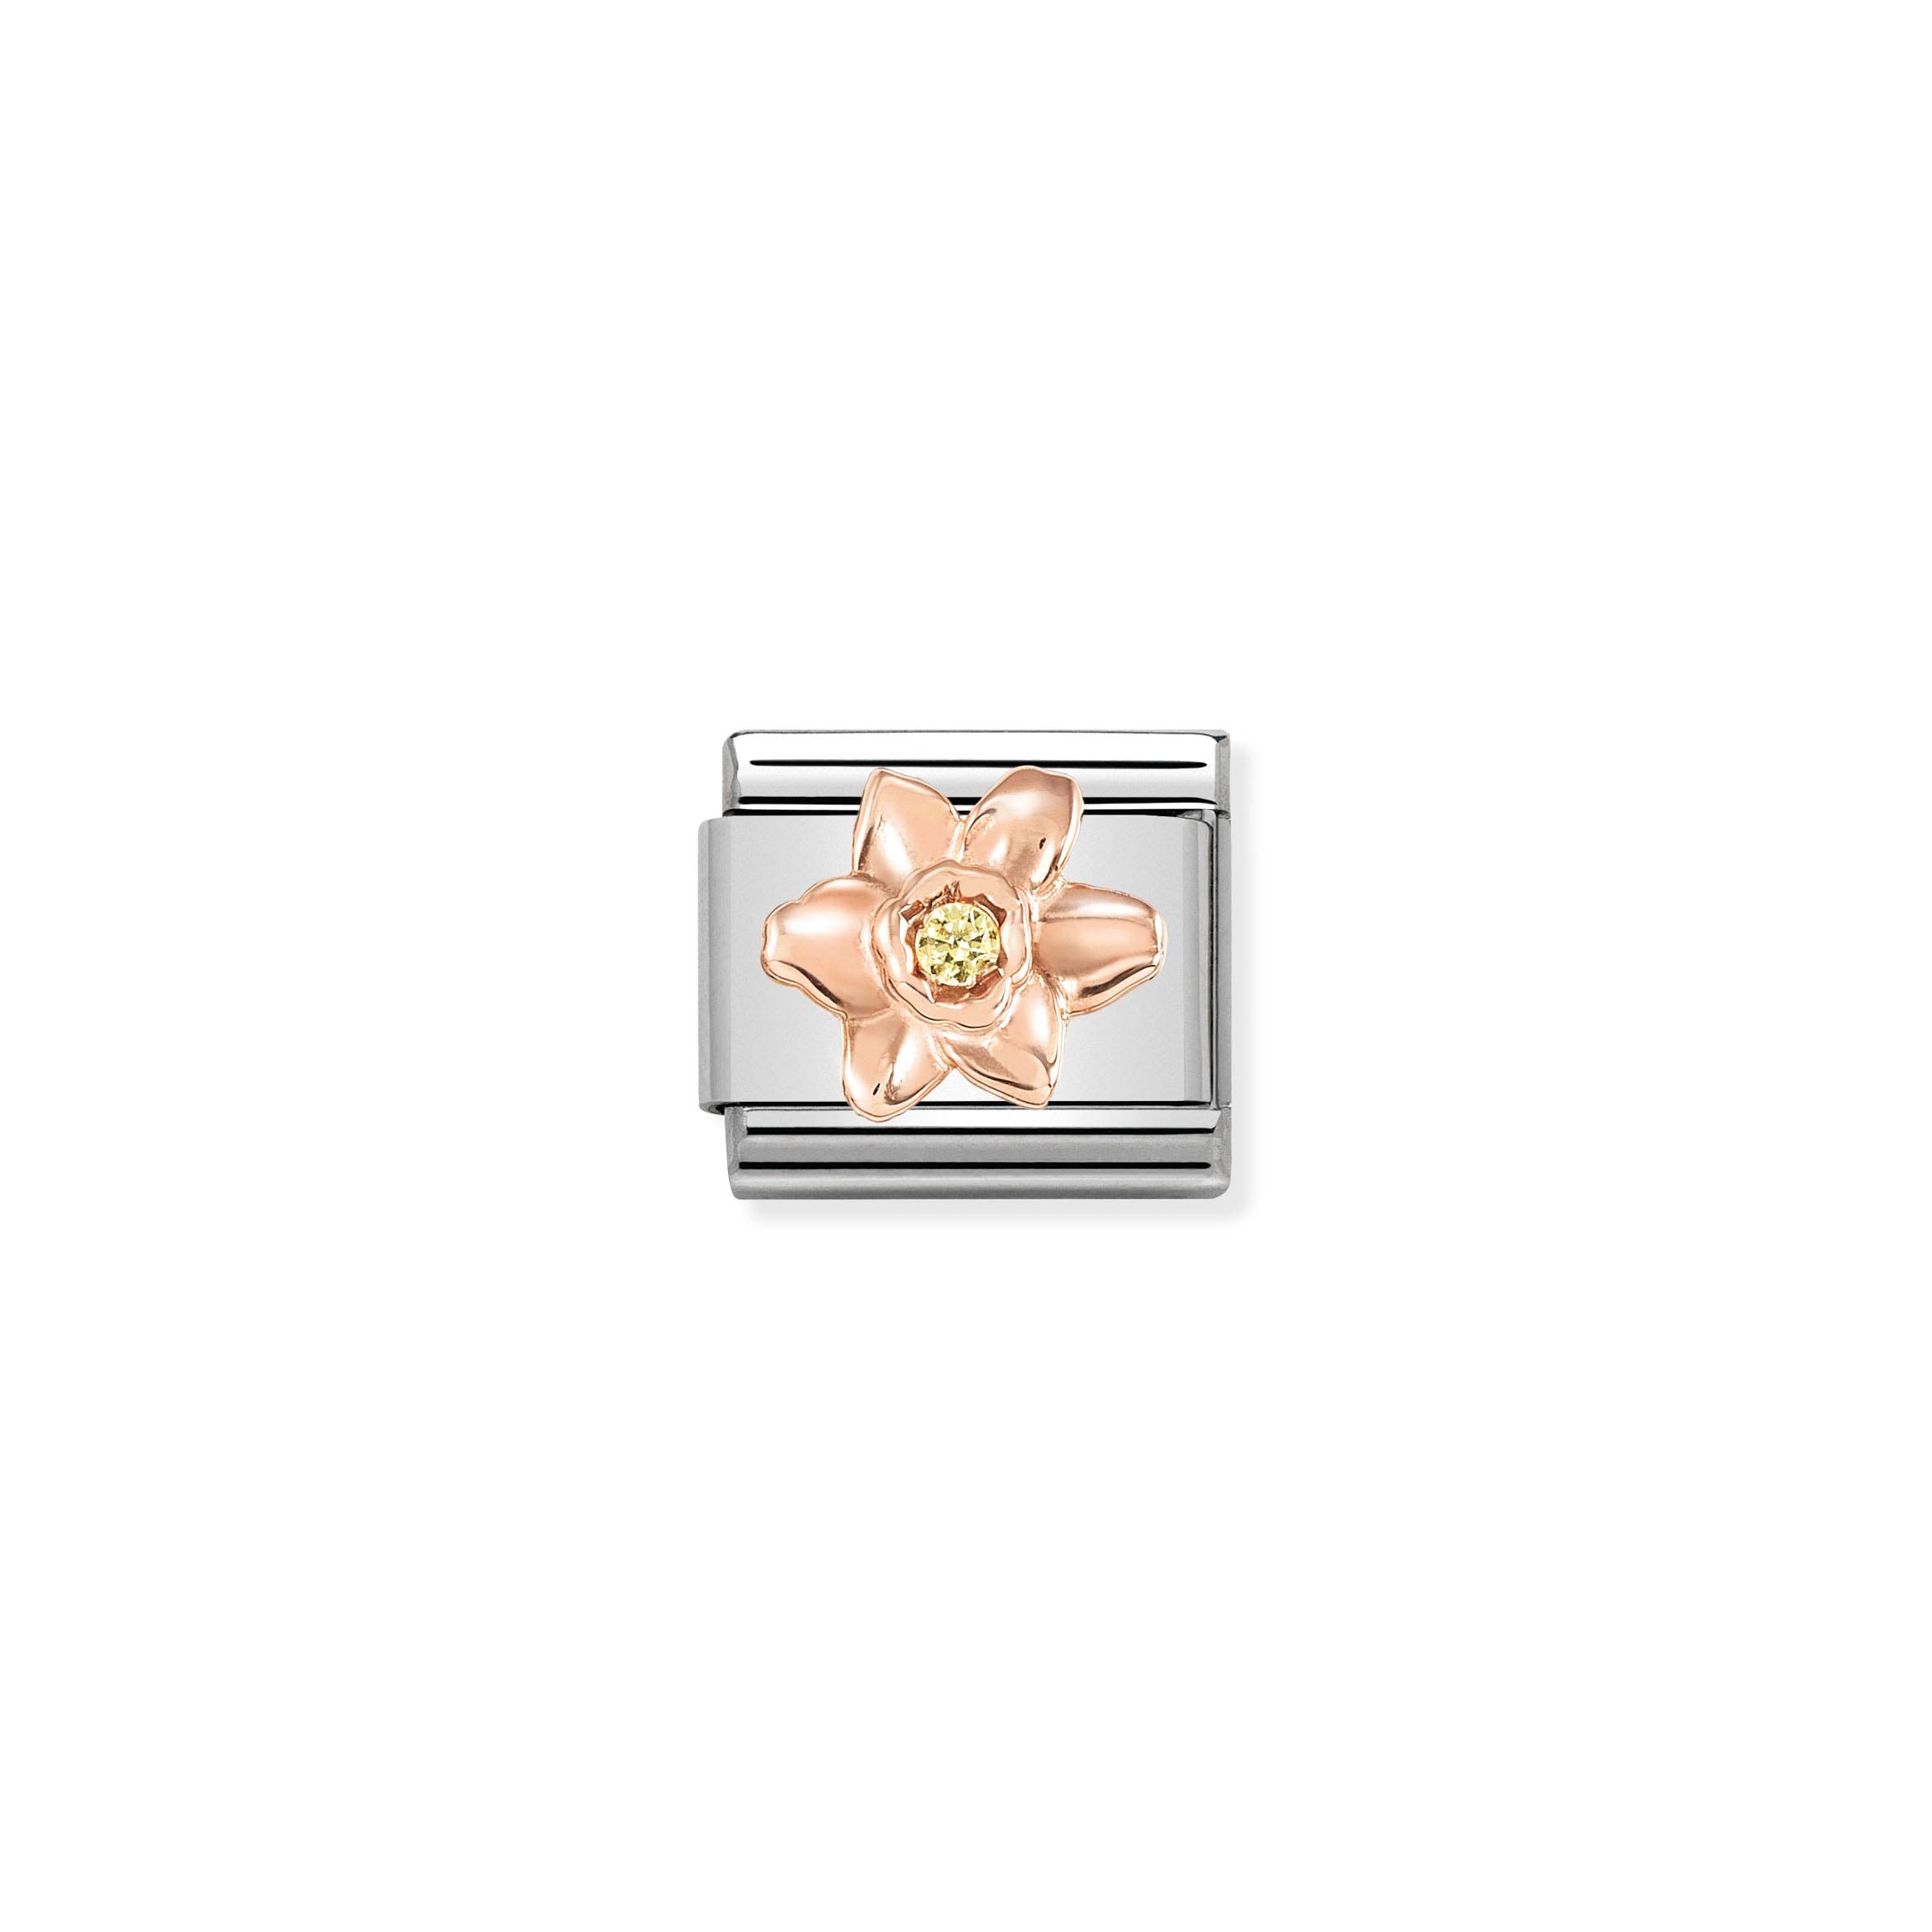 NOMINATION - Composable Classic SYMBOLS st/steel, 9ct rose gold & cz (Daffodil)